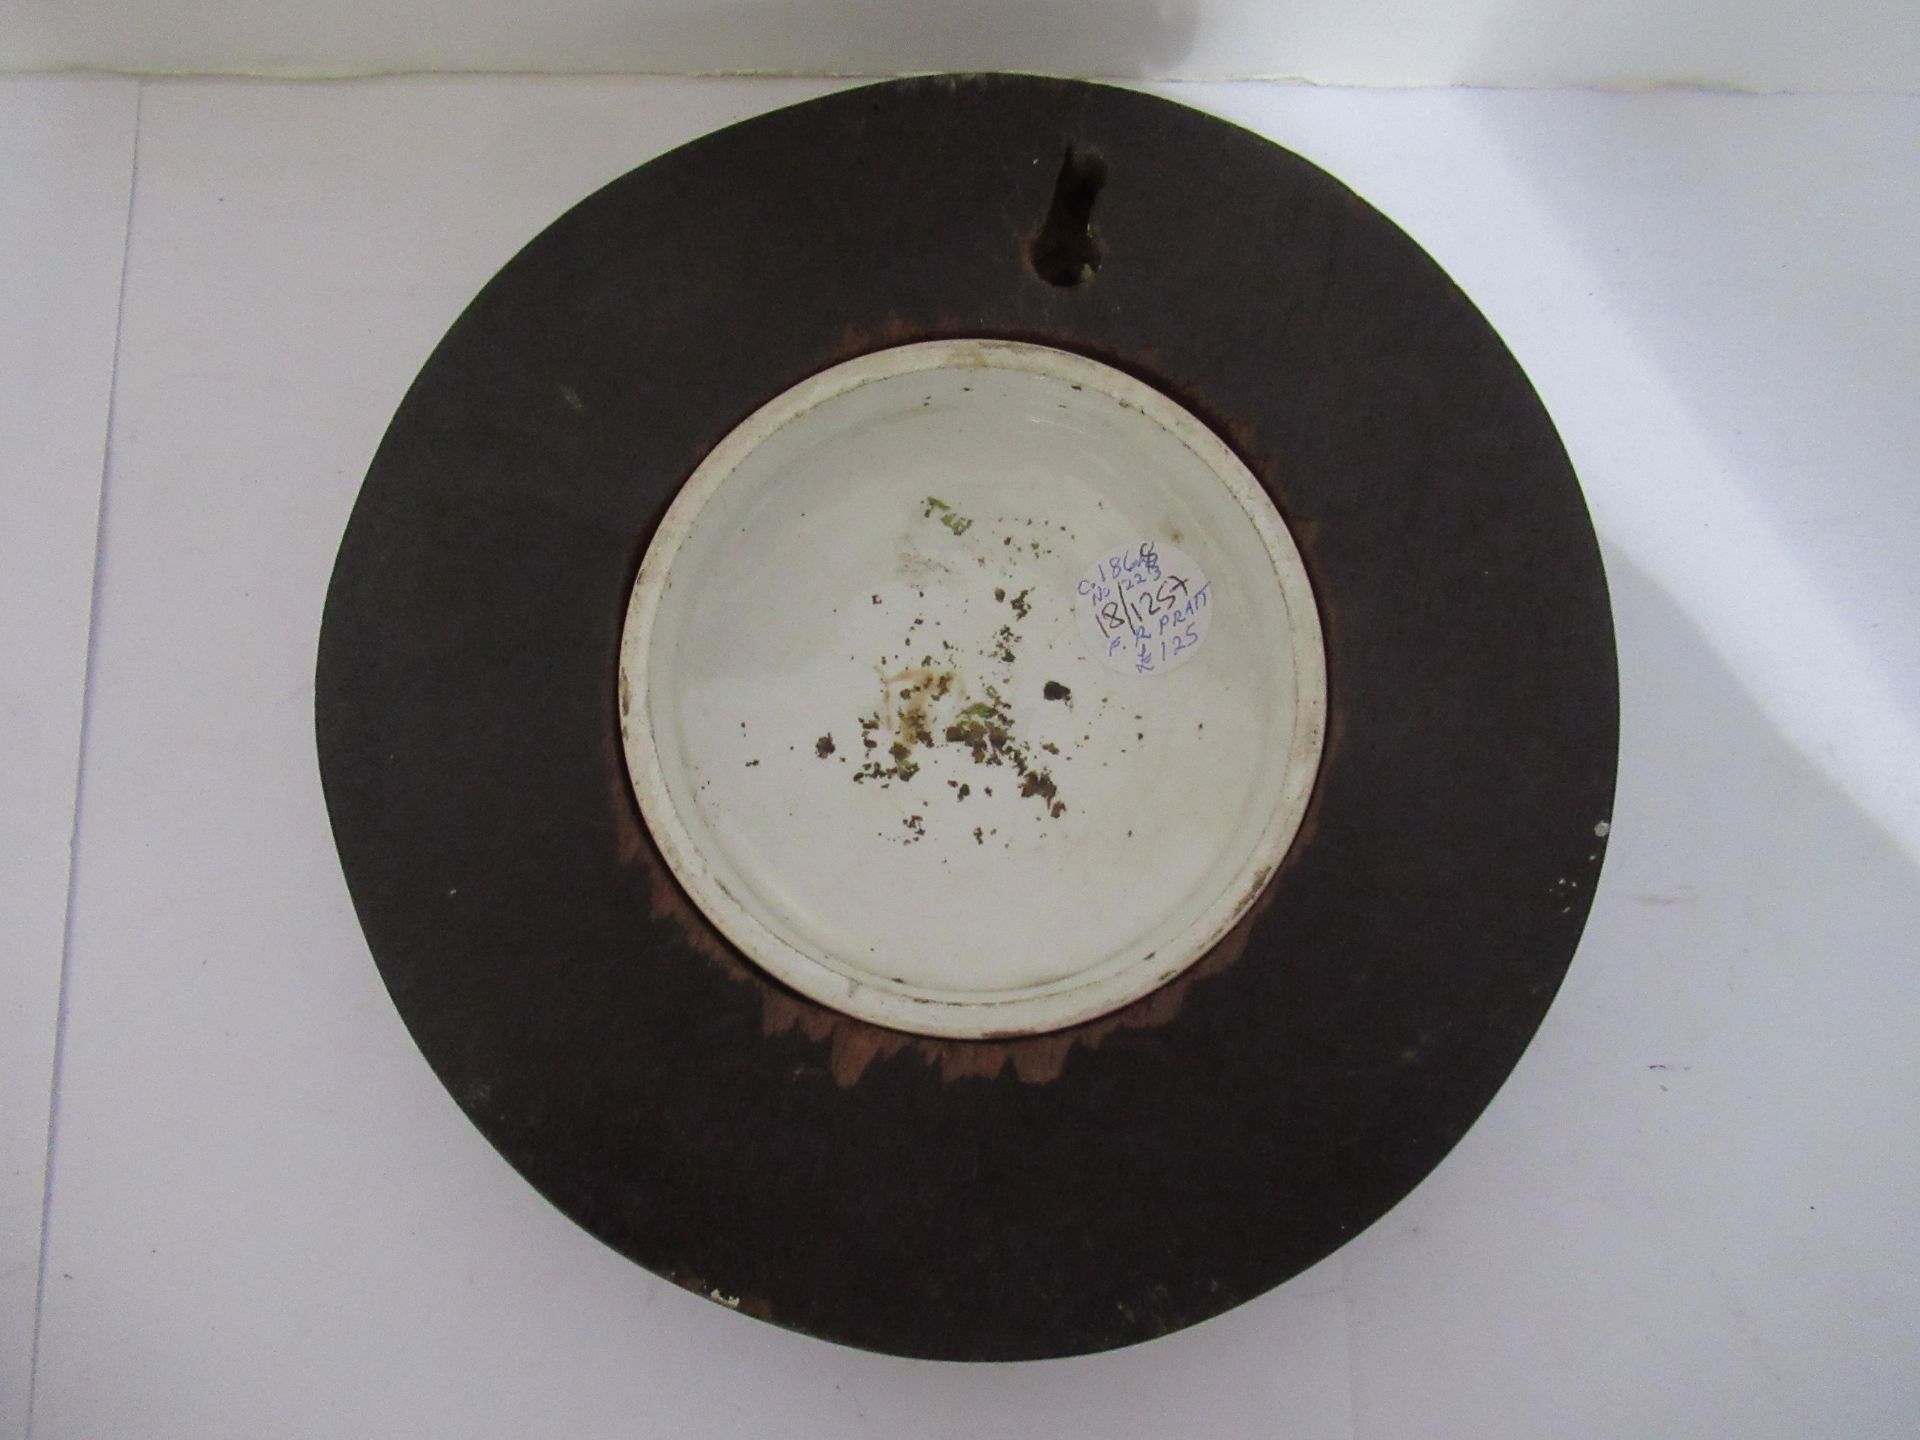 6x Prattware ceramic lids in wooden mounts including 'Pegwell Bay', 'Rifle Contest Wimbledon 1868', - Image 7 of 16